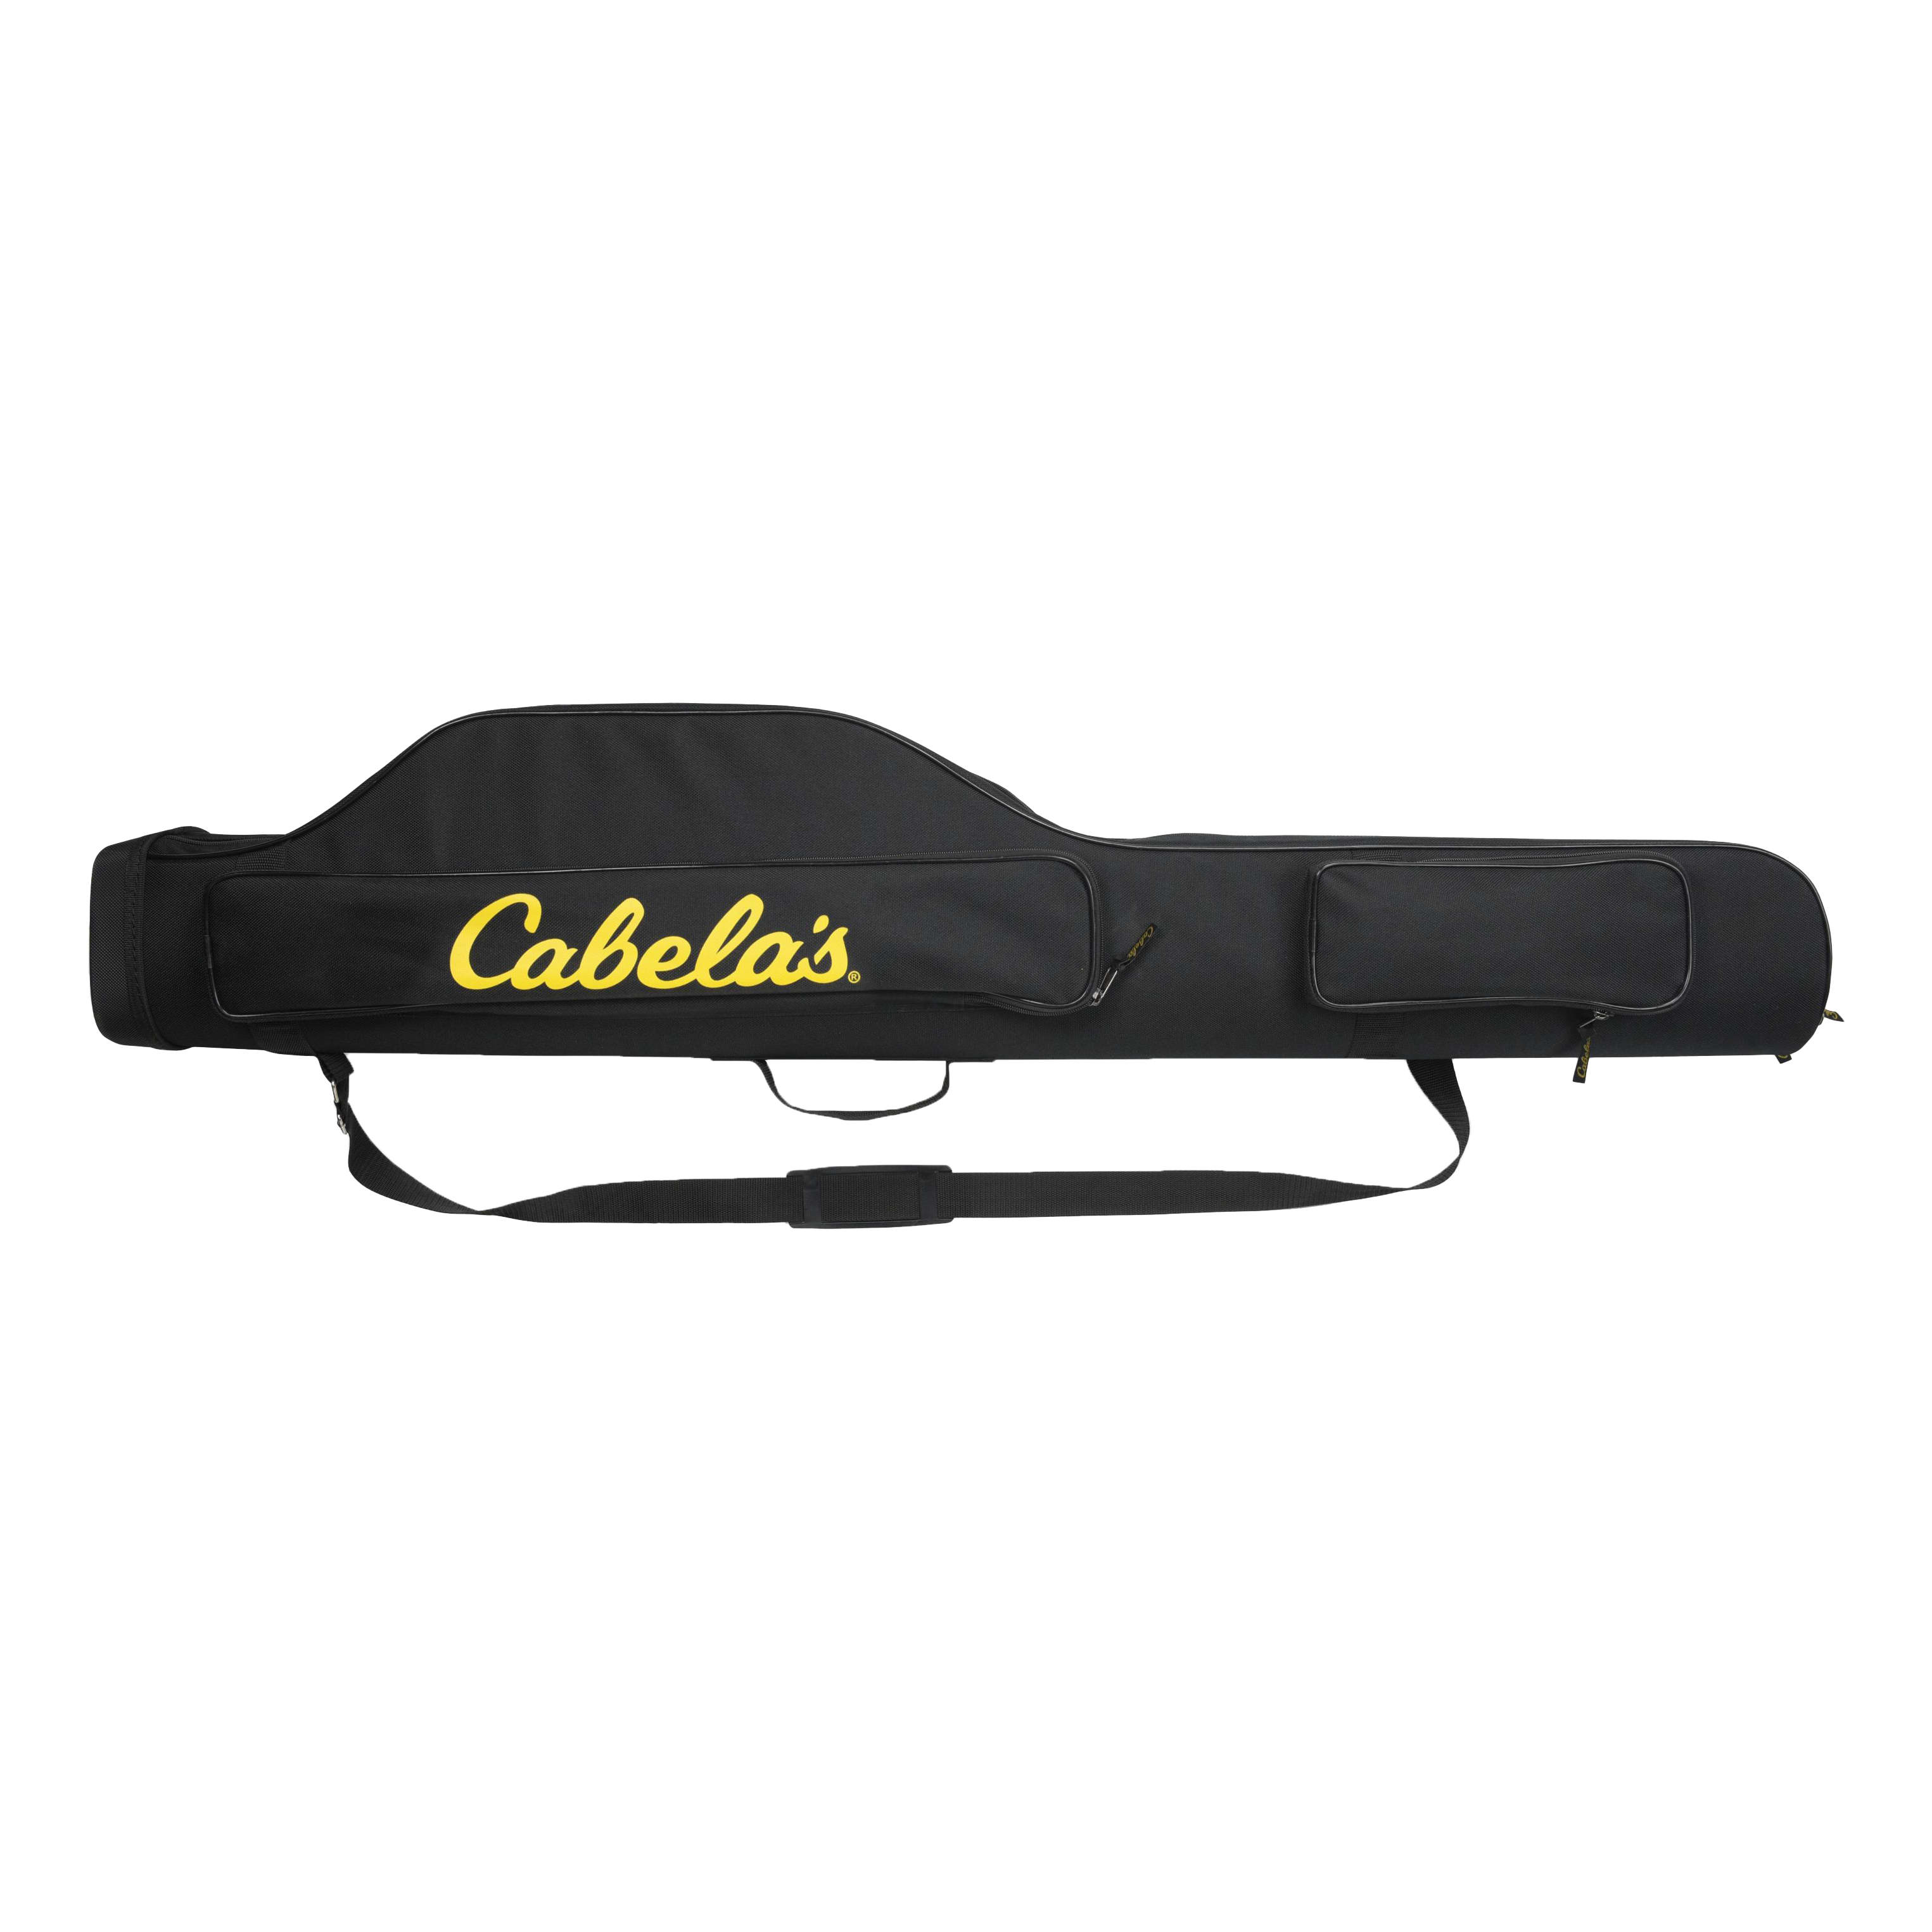 Entsport Fishing Rod Bag 45-inches Durable Fishing Rod Tubes Rod Cases for 2 Piece